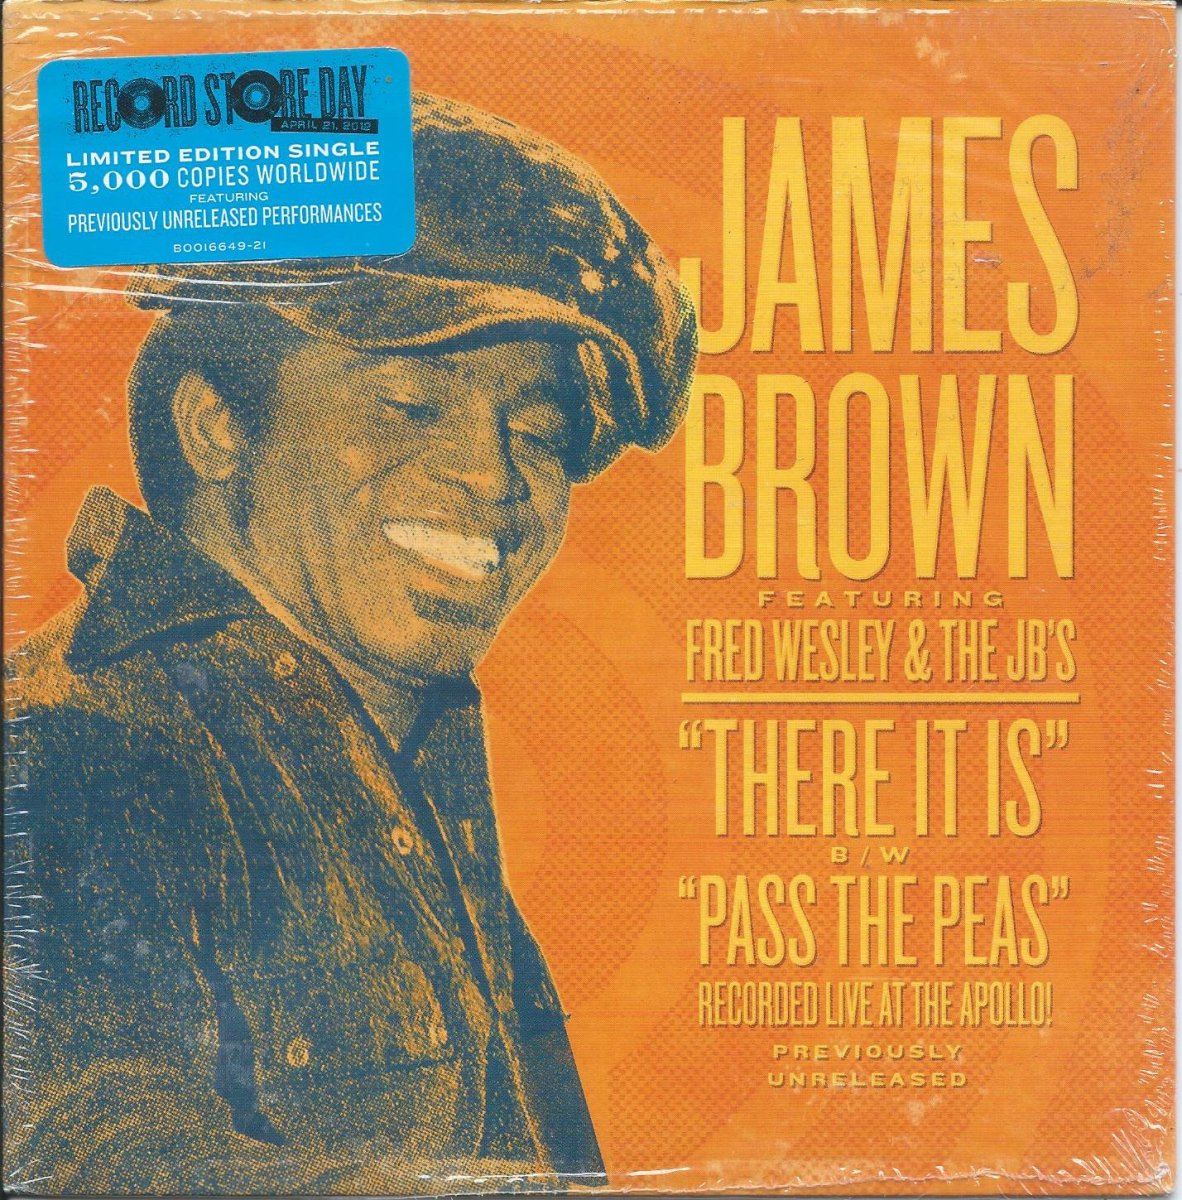 JAMES BROWN FT. FRED WESLEY & THE JB'S / THERE IT IS (LIVE) / PASS THE PEAS (LIVE) (7